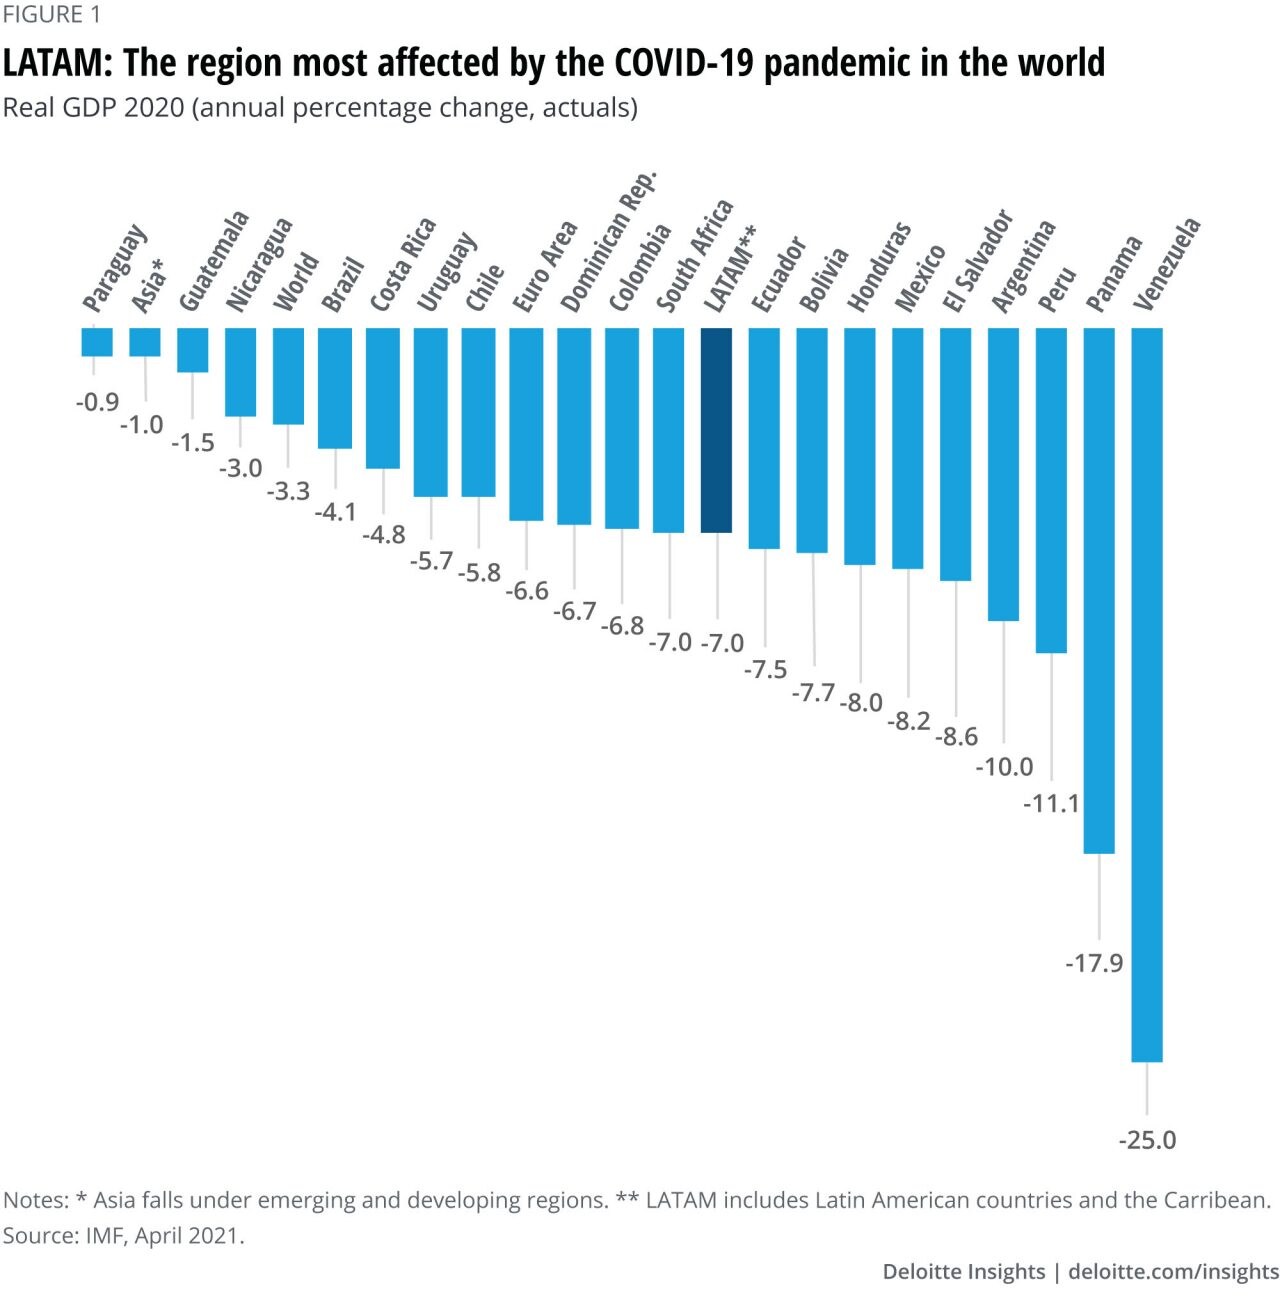 Figure 1. LATAM: The region most affected by the COVID-19 pandemic in the world